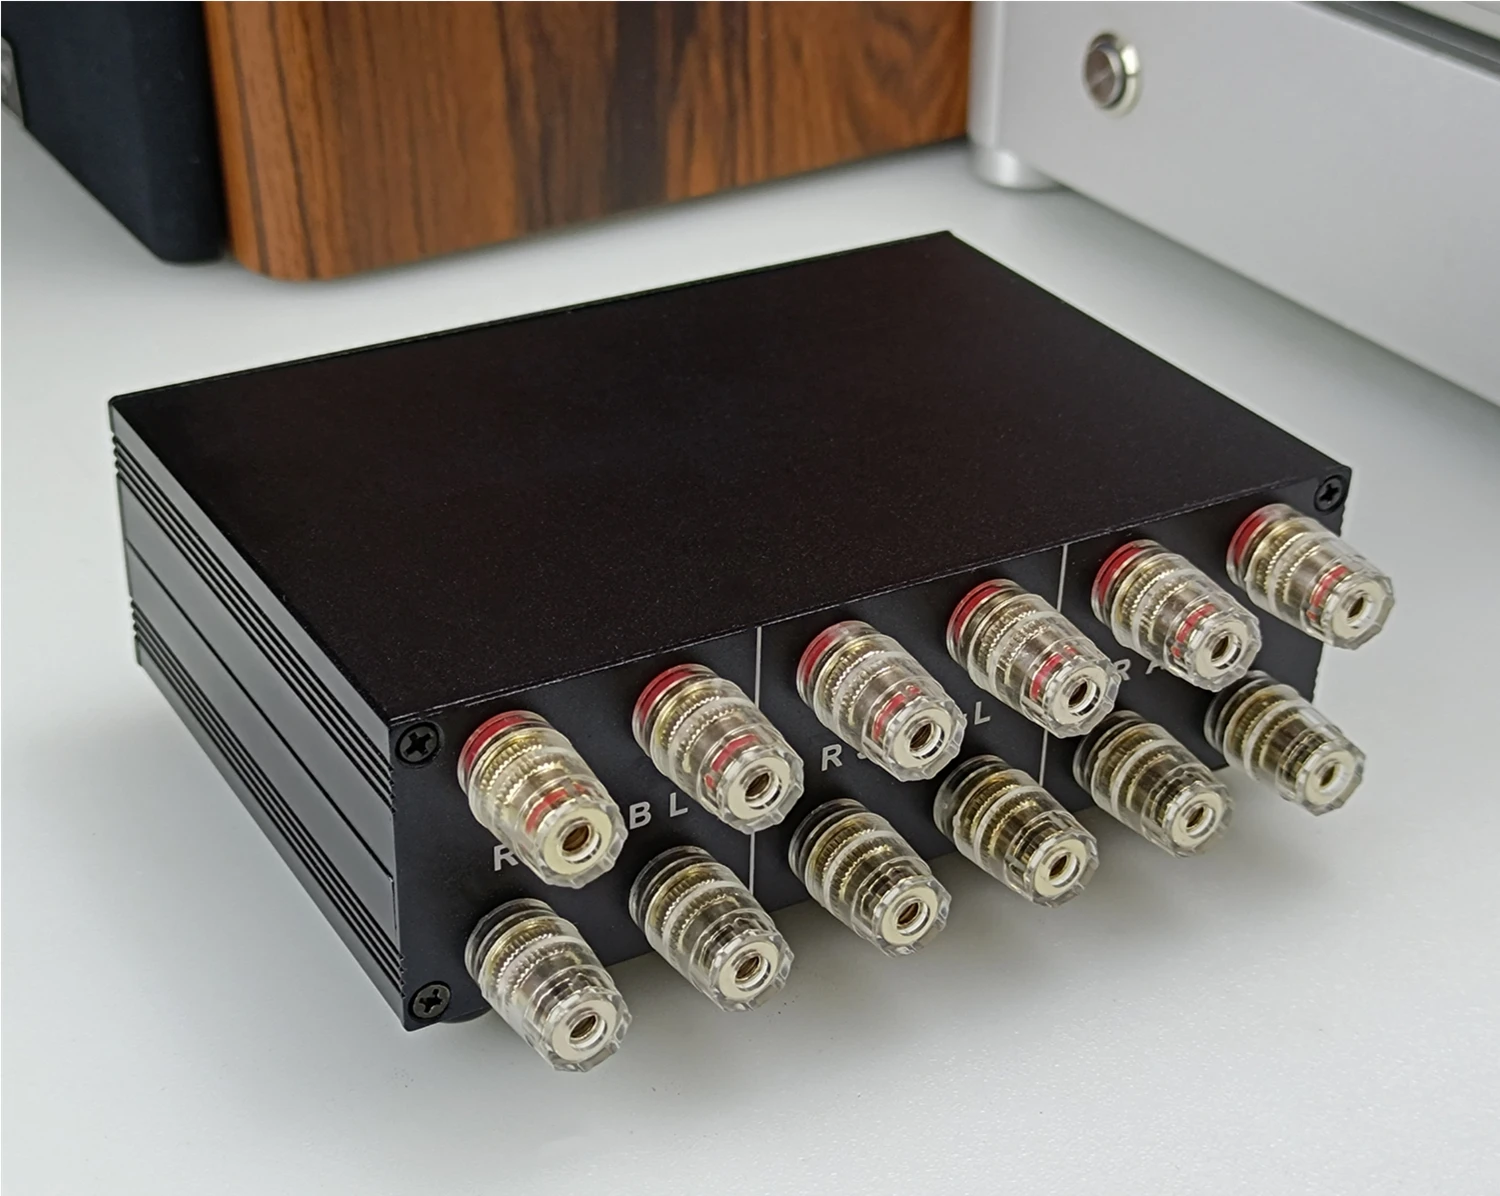 2-way amp amplifier / speaker loudspeaker selector switch box, stereo audio input signal source switcher passive for hifi  audio images - 6